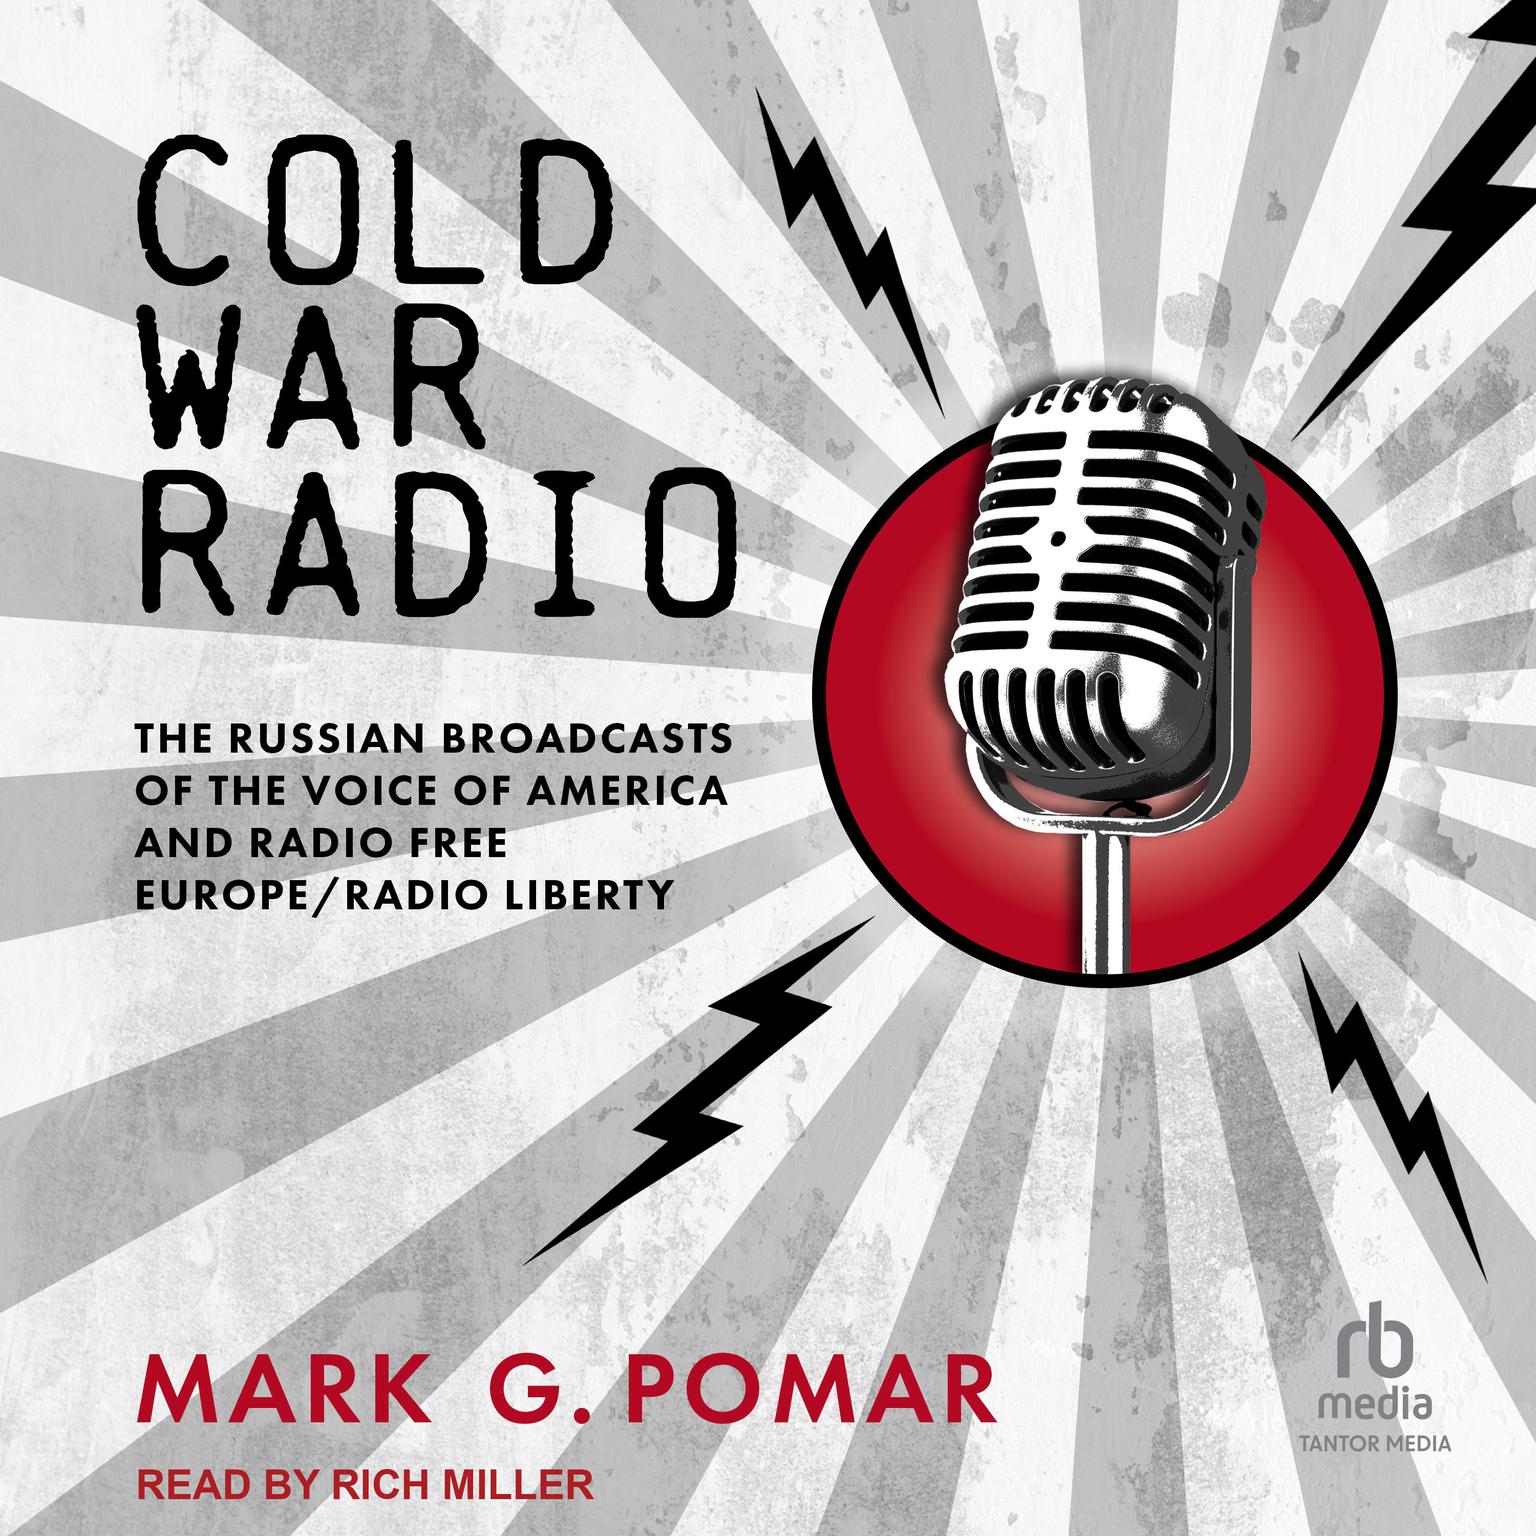 Cold War Radio: The Russian Broadcasts of the Voice of America and Radio Free Europe/Radio Liberty Audiobook, by Mark G. Pomar